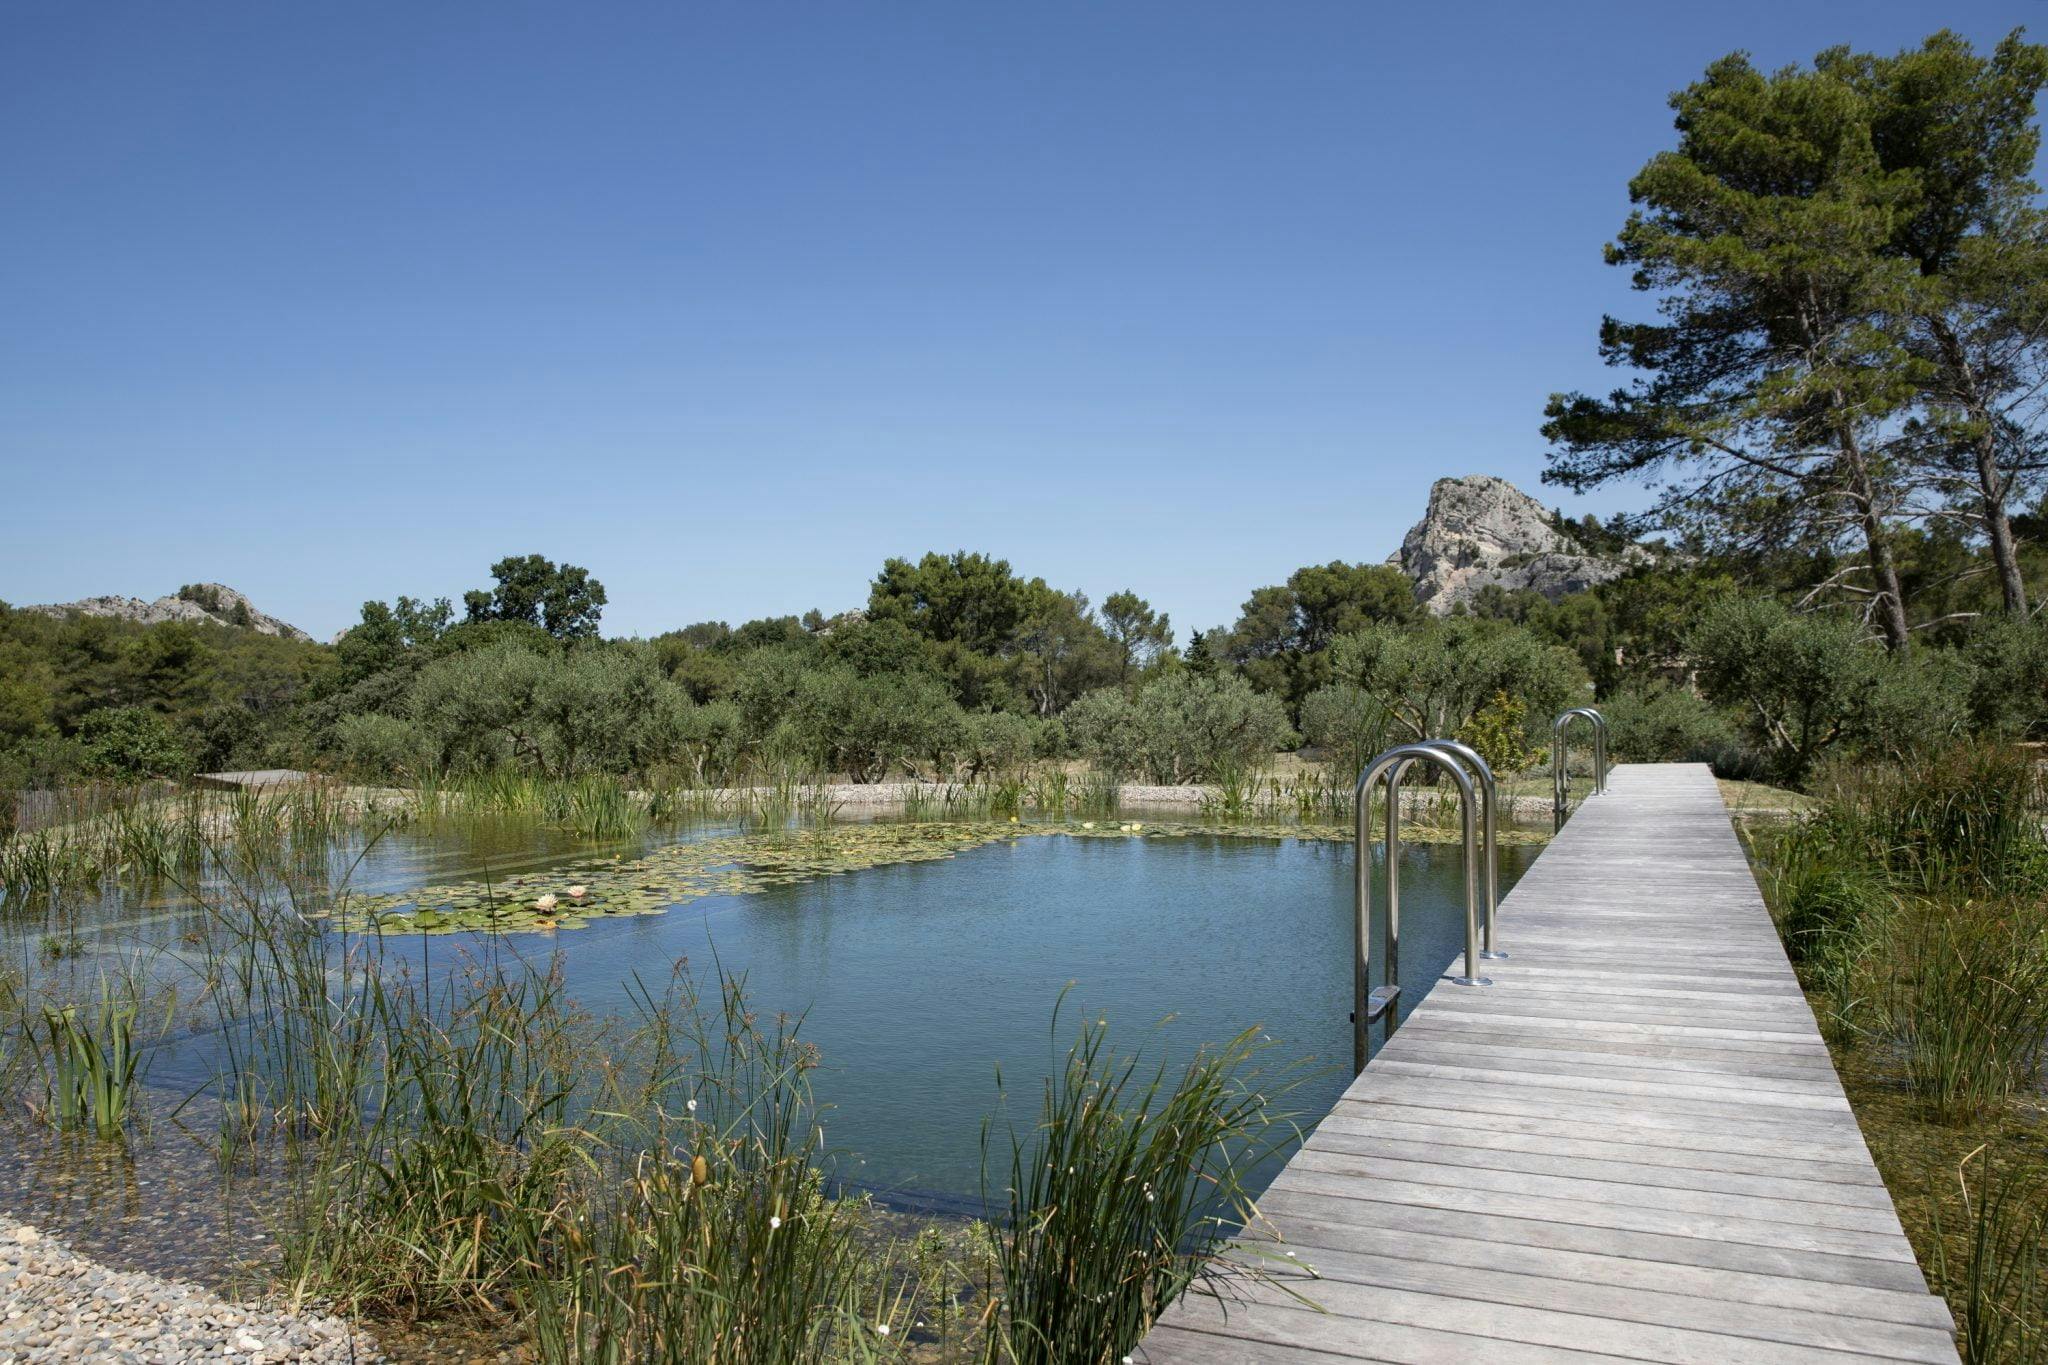 In the Alpilles mountain range, a farmhouse with a natural pool.